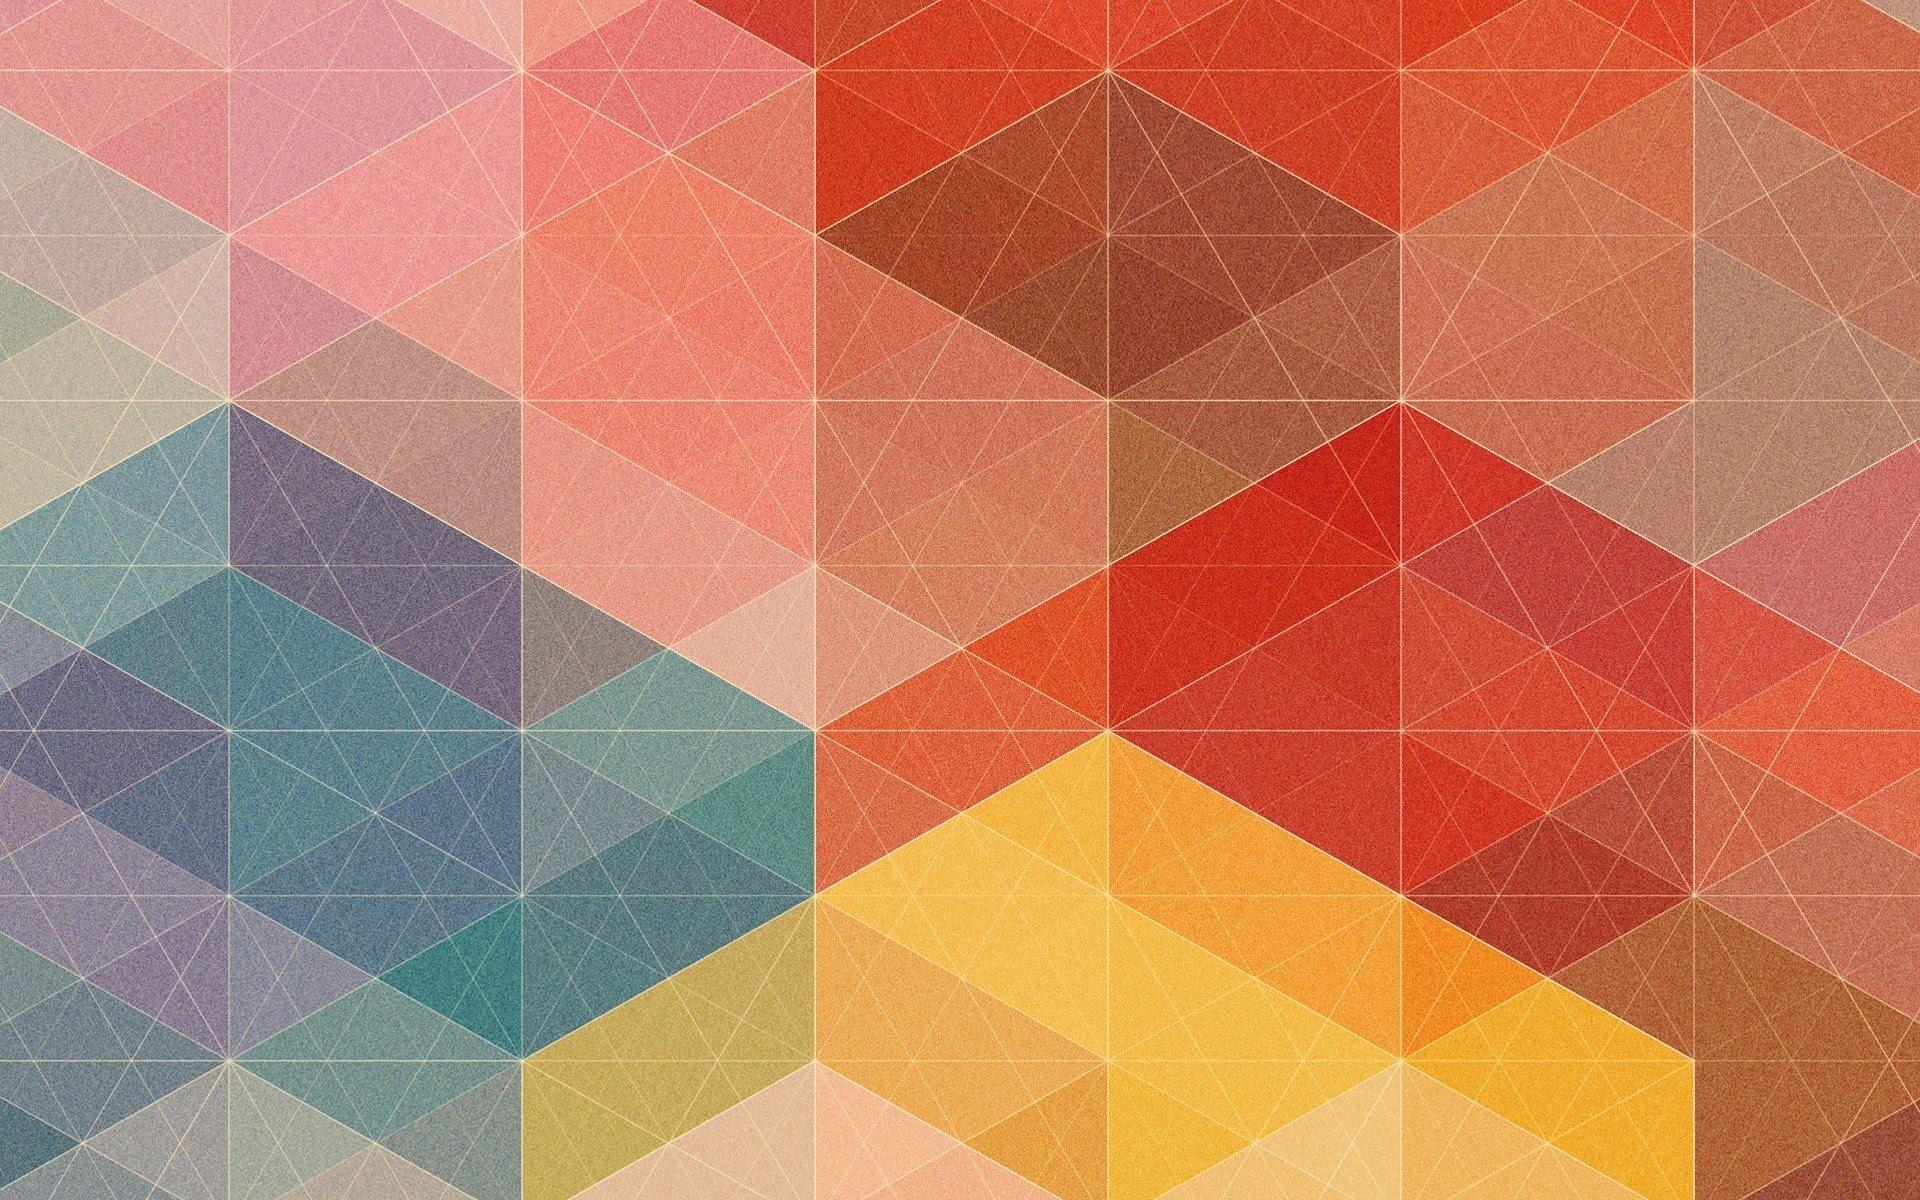 Abstract Cool D Colorful Shape Free Wallpaper HD Keyword: Shapes